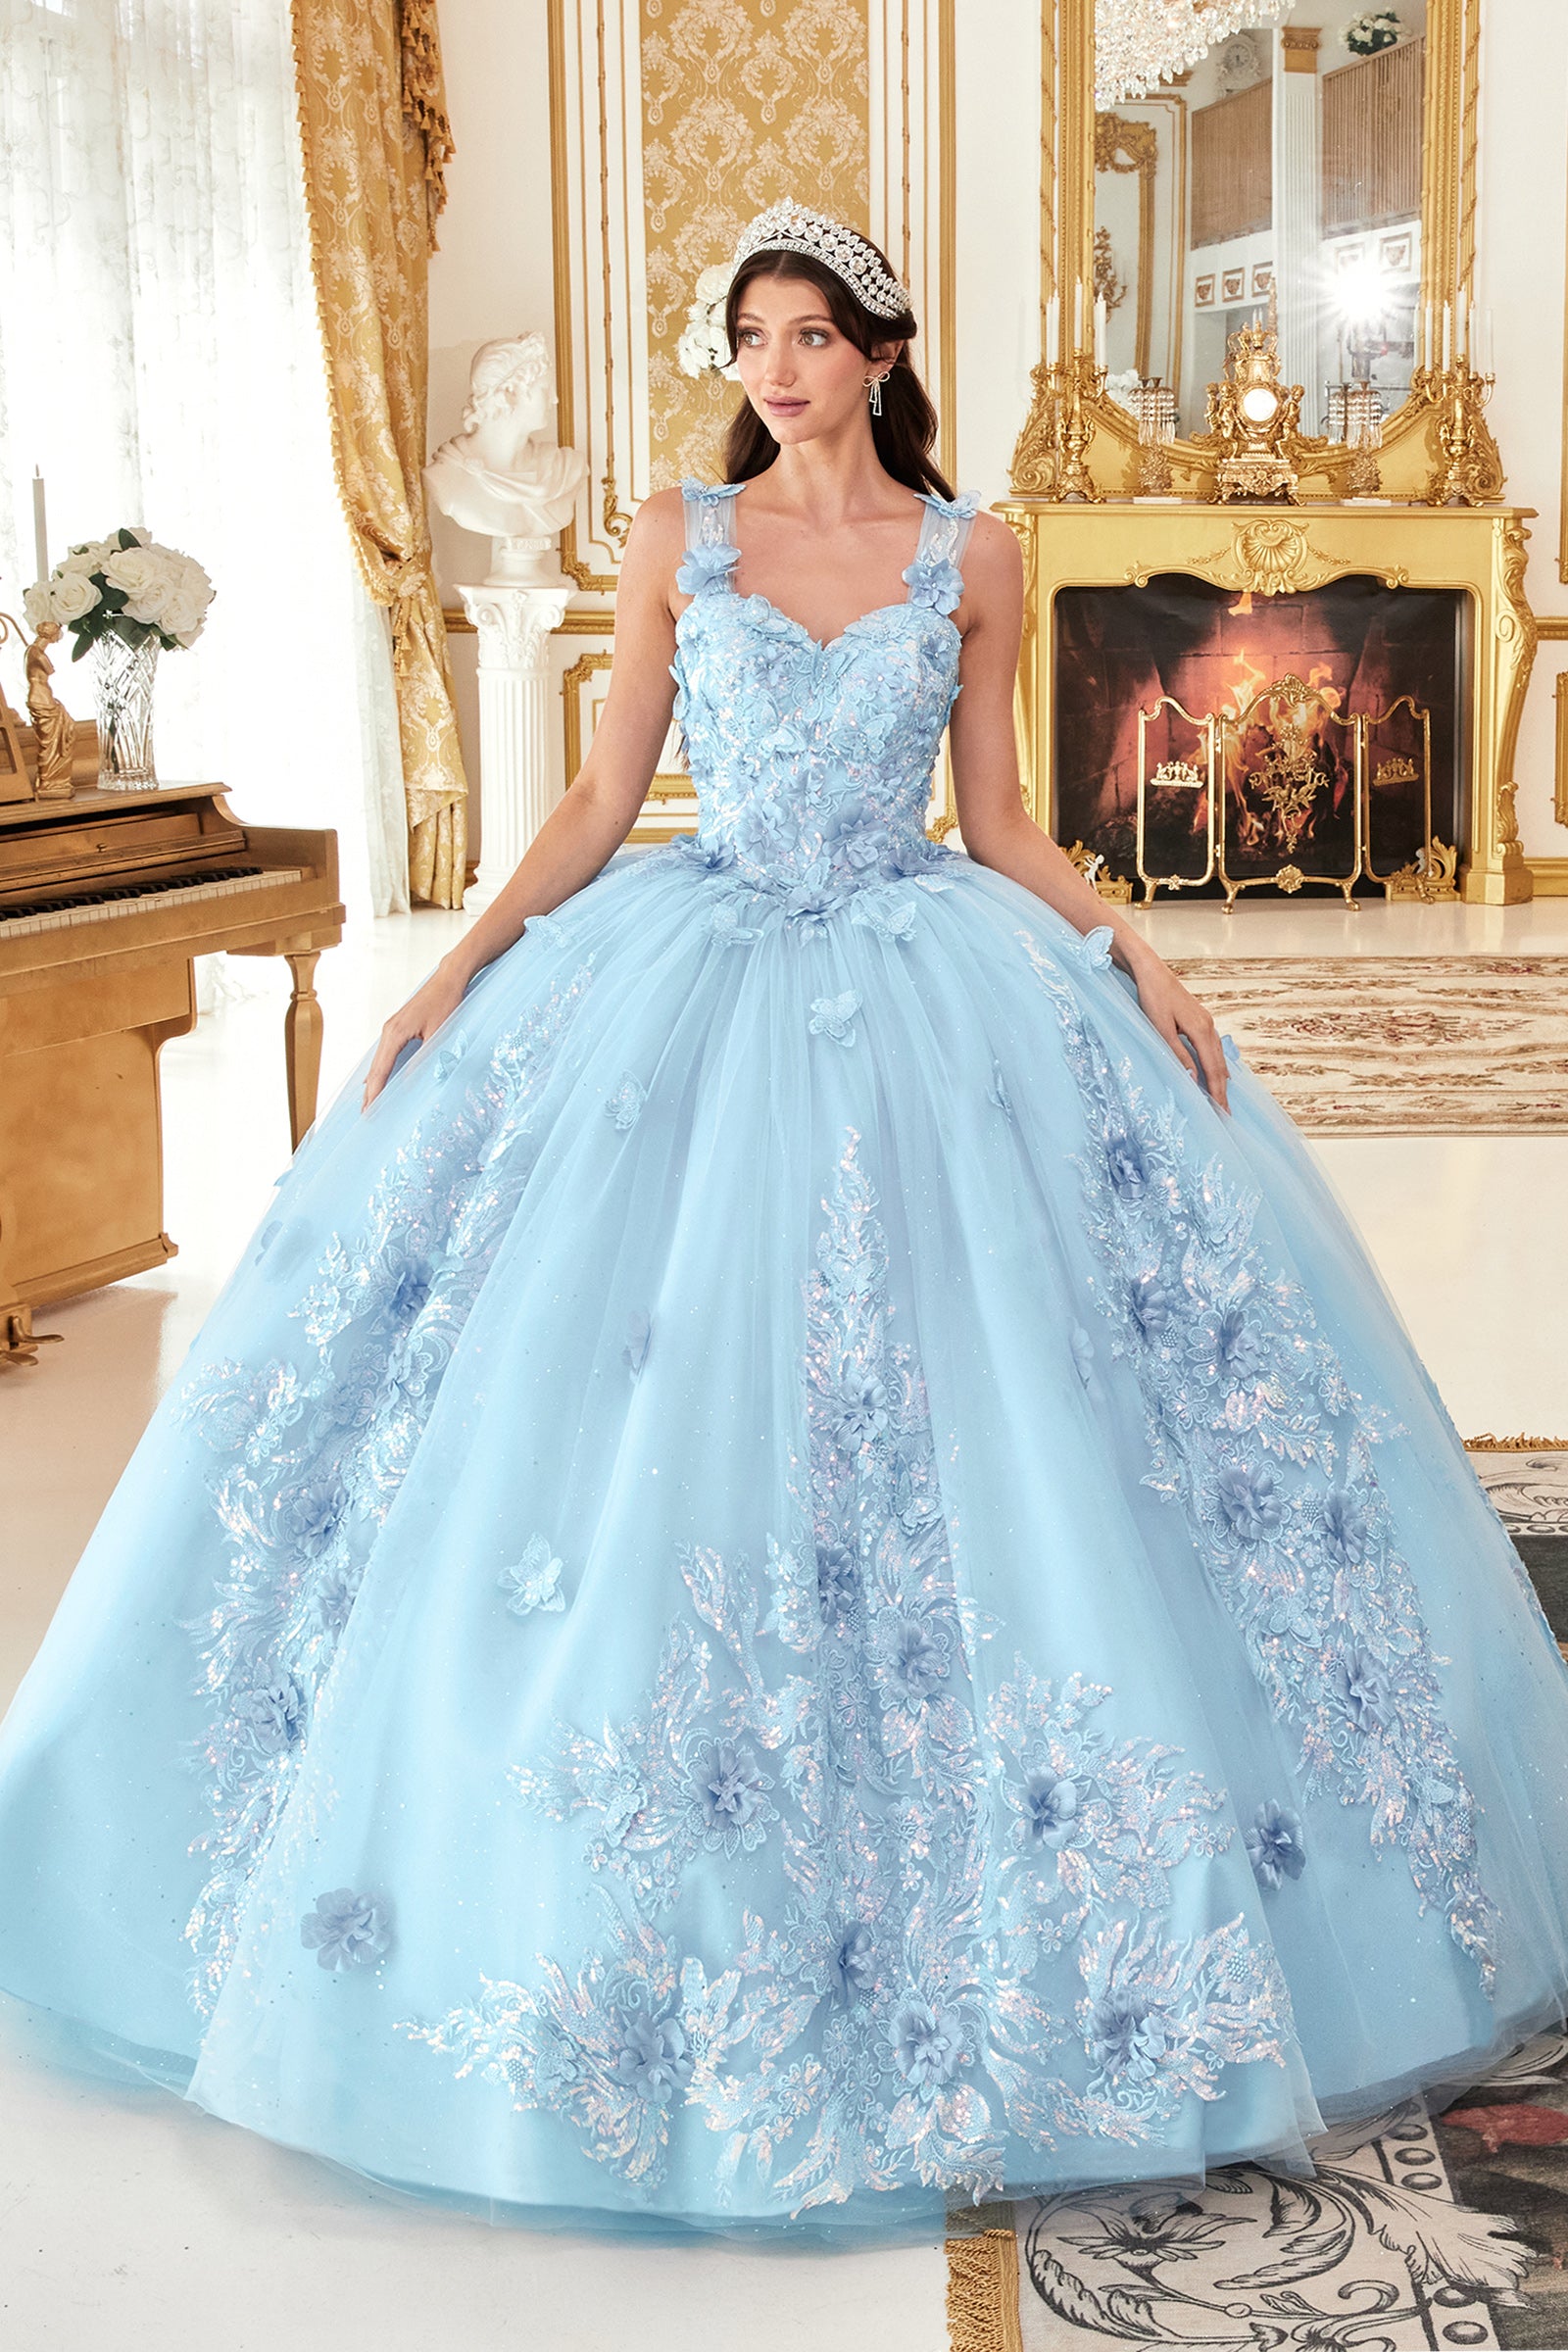 Floral Appliqued Ball Gown By Cinderella Divine -15713